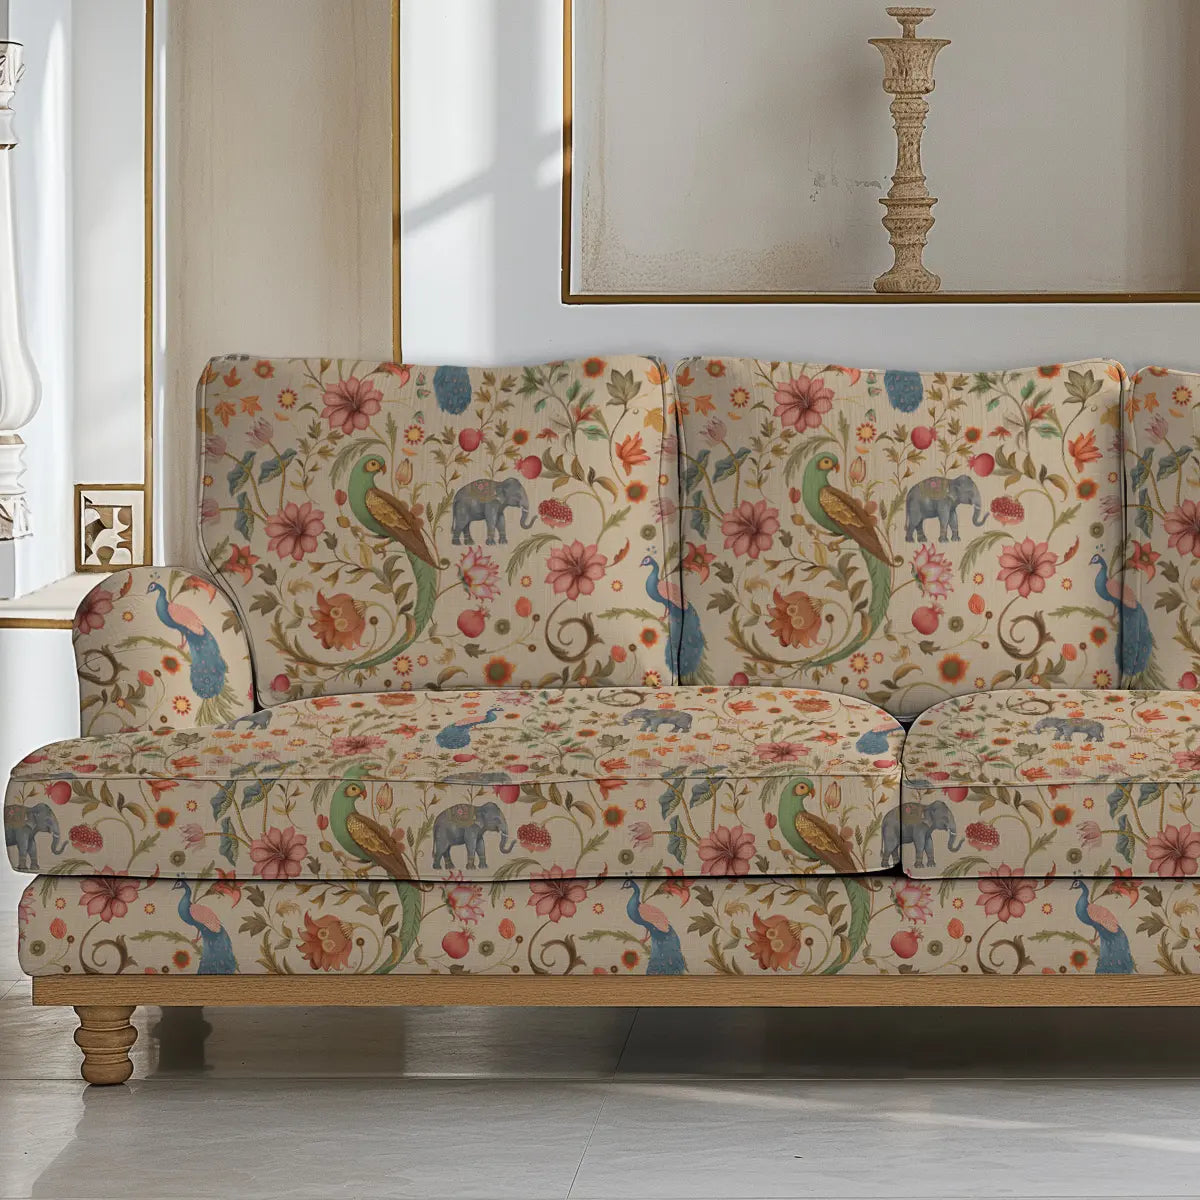 Buy Sanjhi Indian Sofa and Chairs Upholstery Fabric Cream